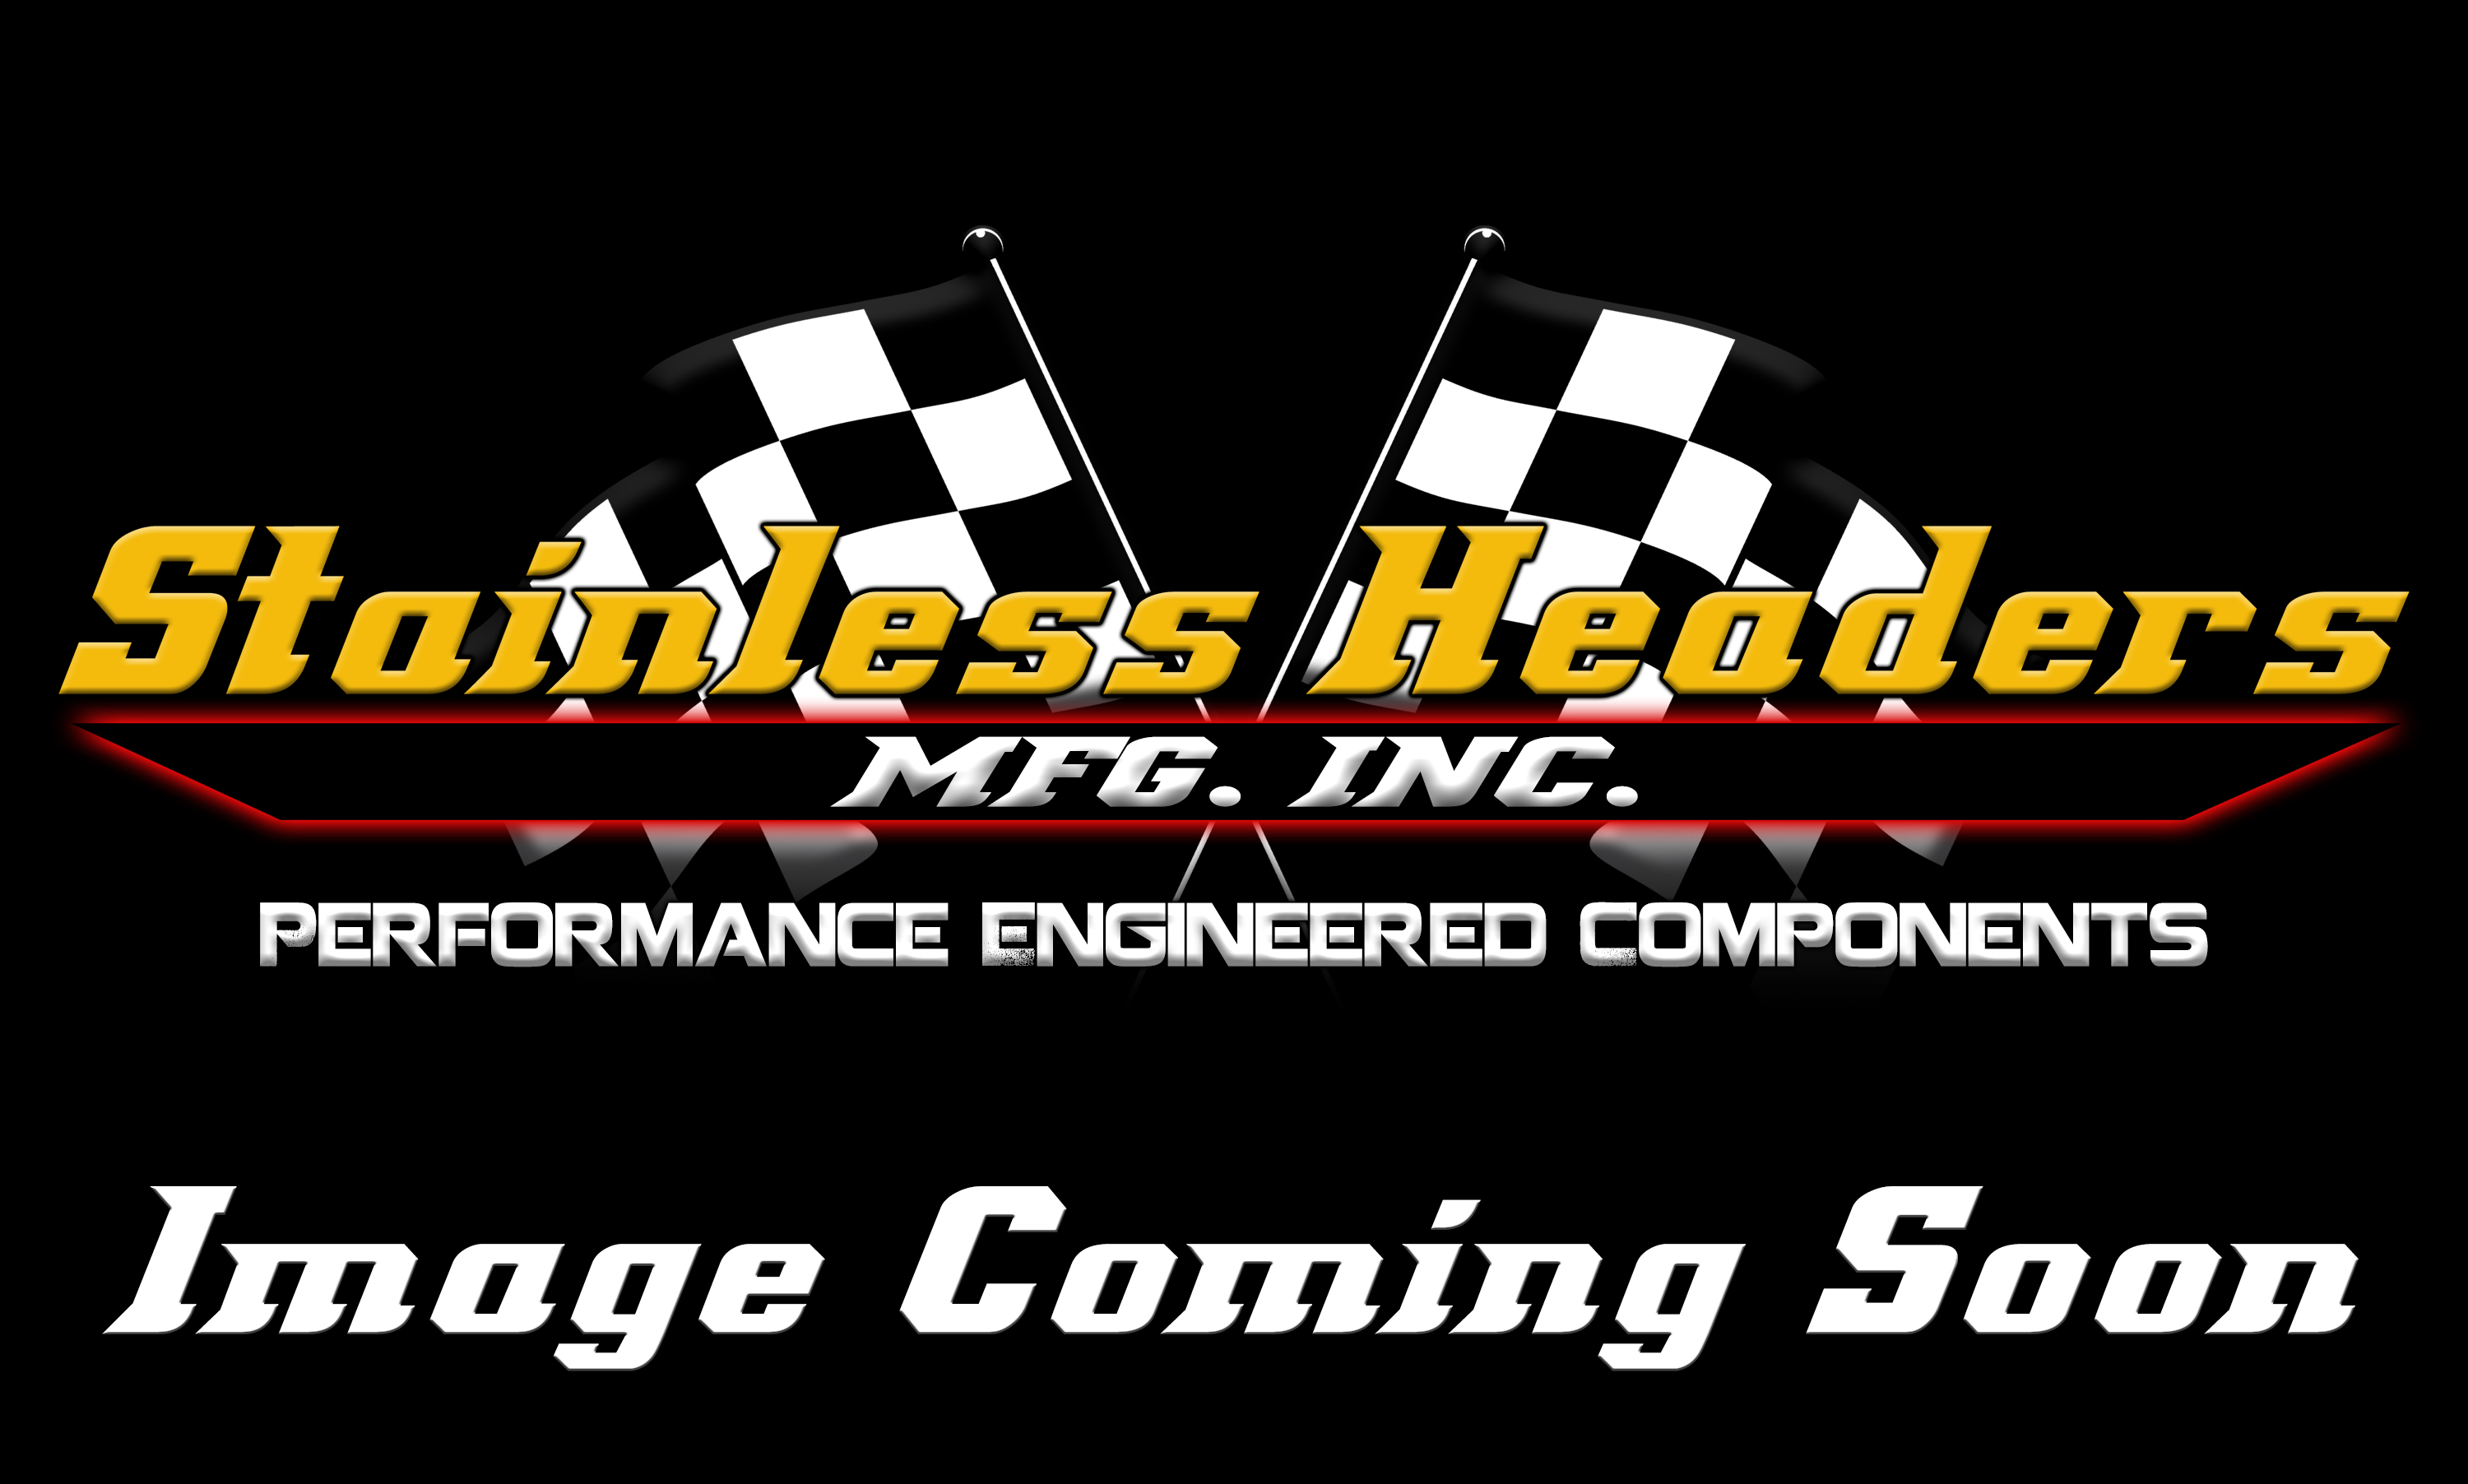 CompTurbo Technology Turbochargers - Comp Turbo Journal Bearing Turbochargers - CompTurbo Technologies - CTR3281S-6062 Reverse Rotation 360 Journal Bearing Turbocharger (750 HP)